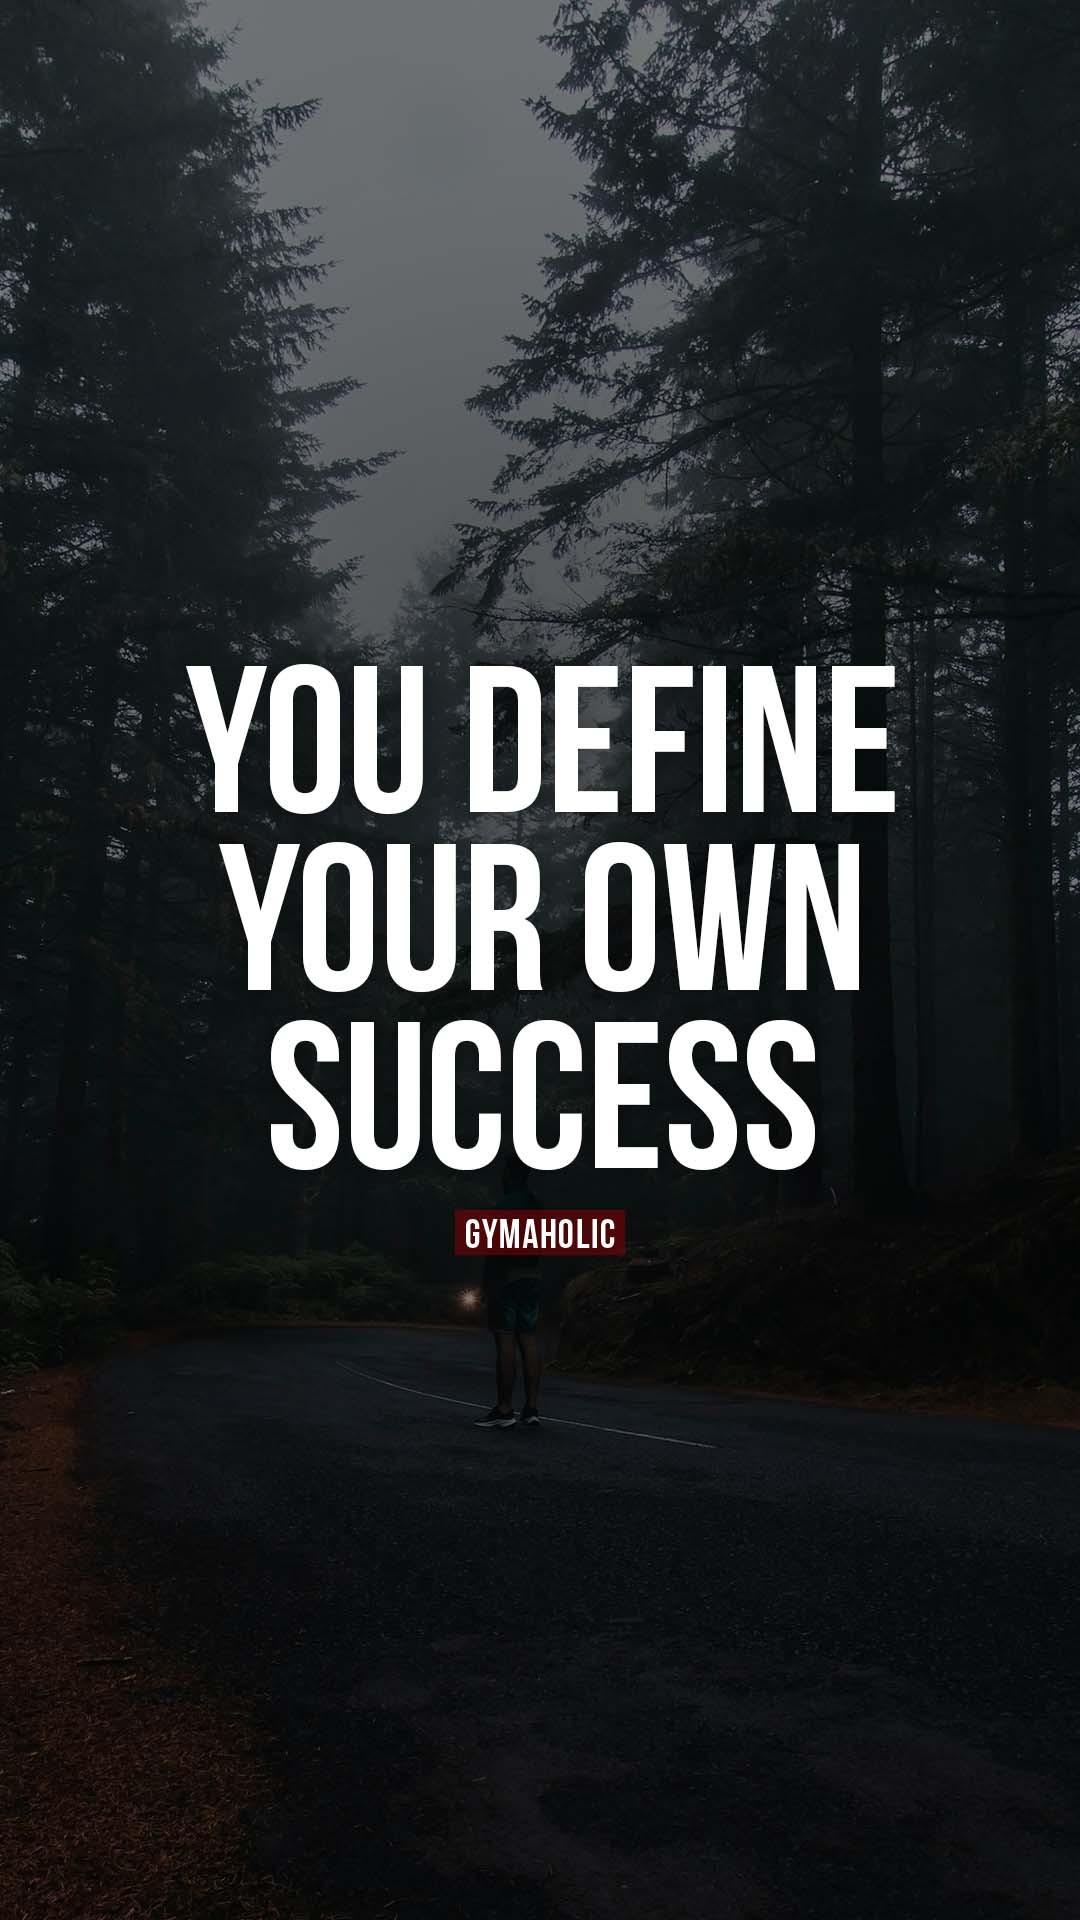 You define your own success